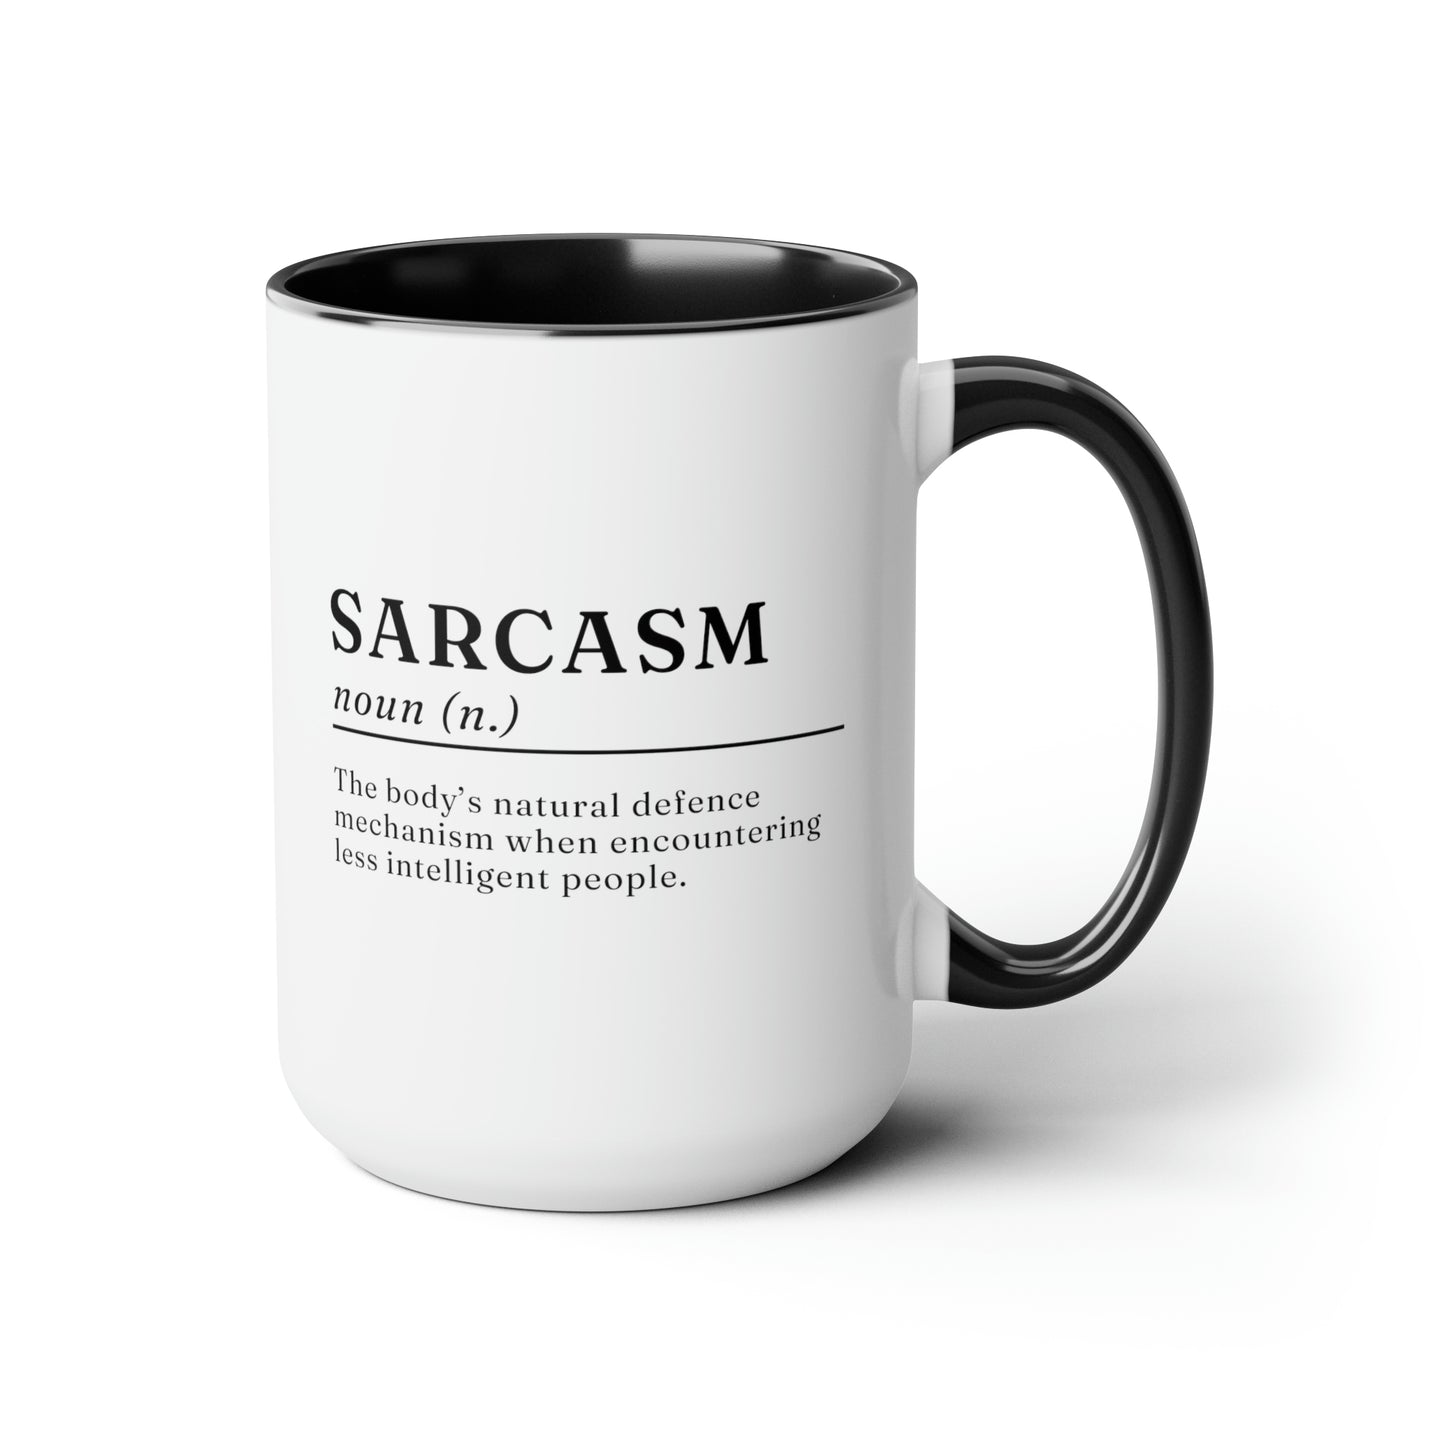 Sarcasm Definition 15oz white with black accent funny large coffee mug gift for friend dictionary novelty joke sarcastic sassy snarky meaning waveywares wavey wares wavywares wavy wares